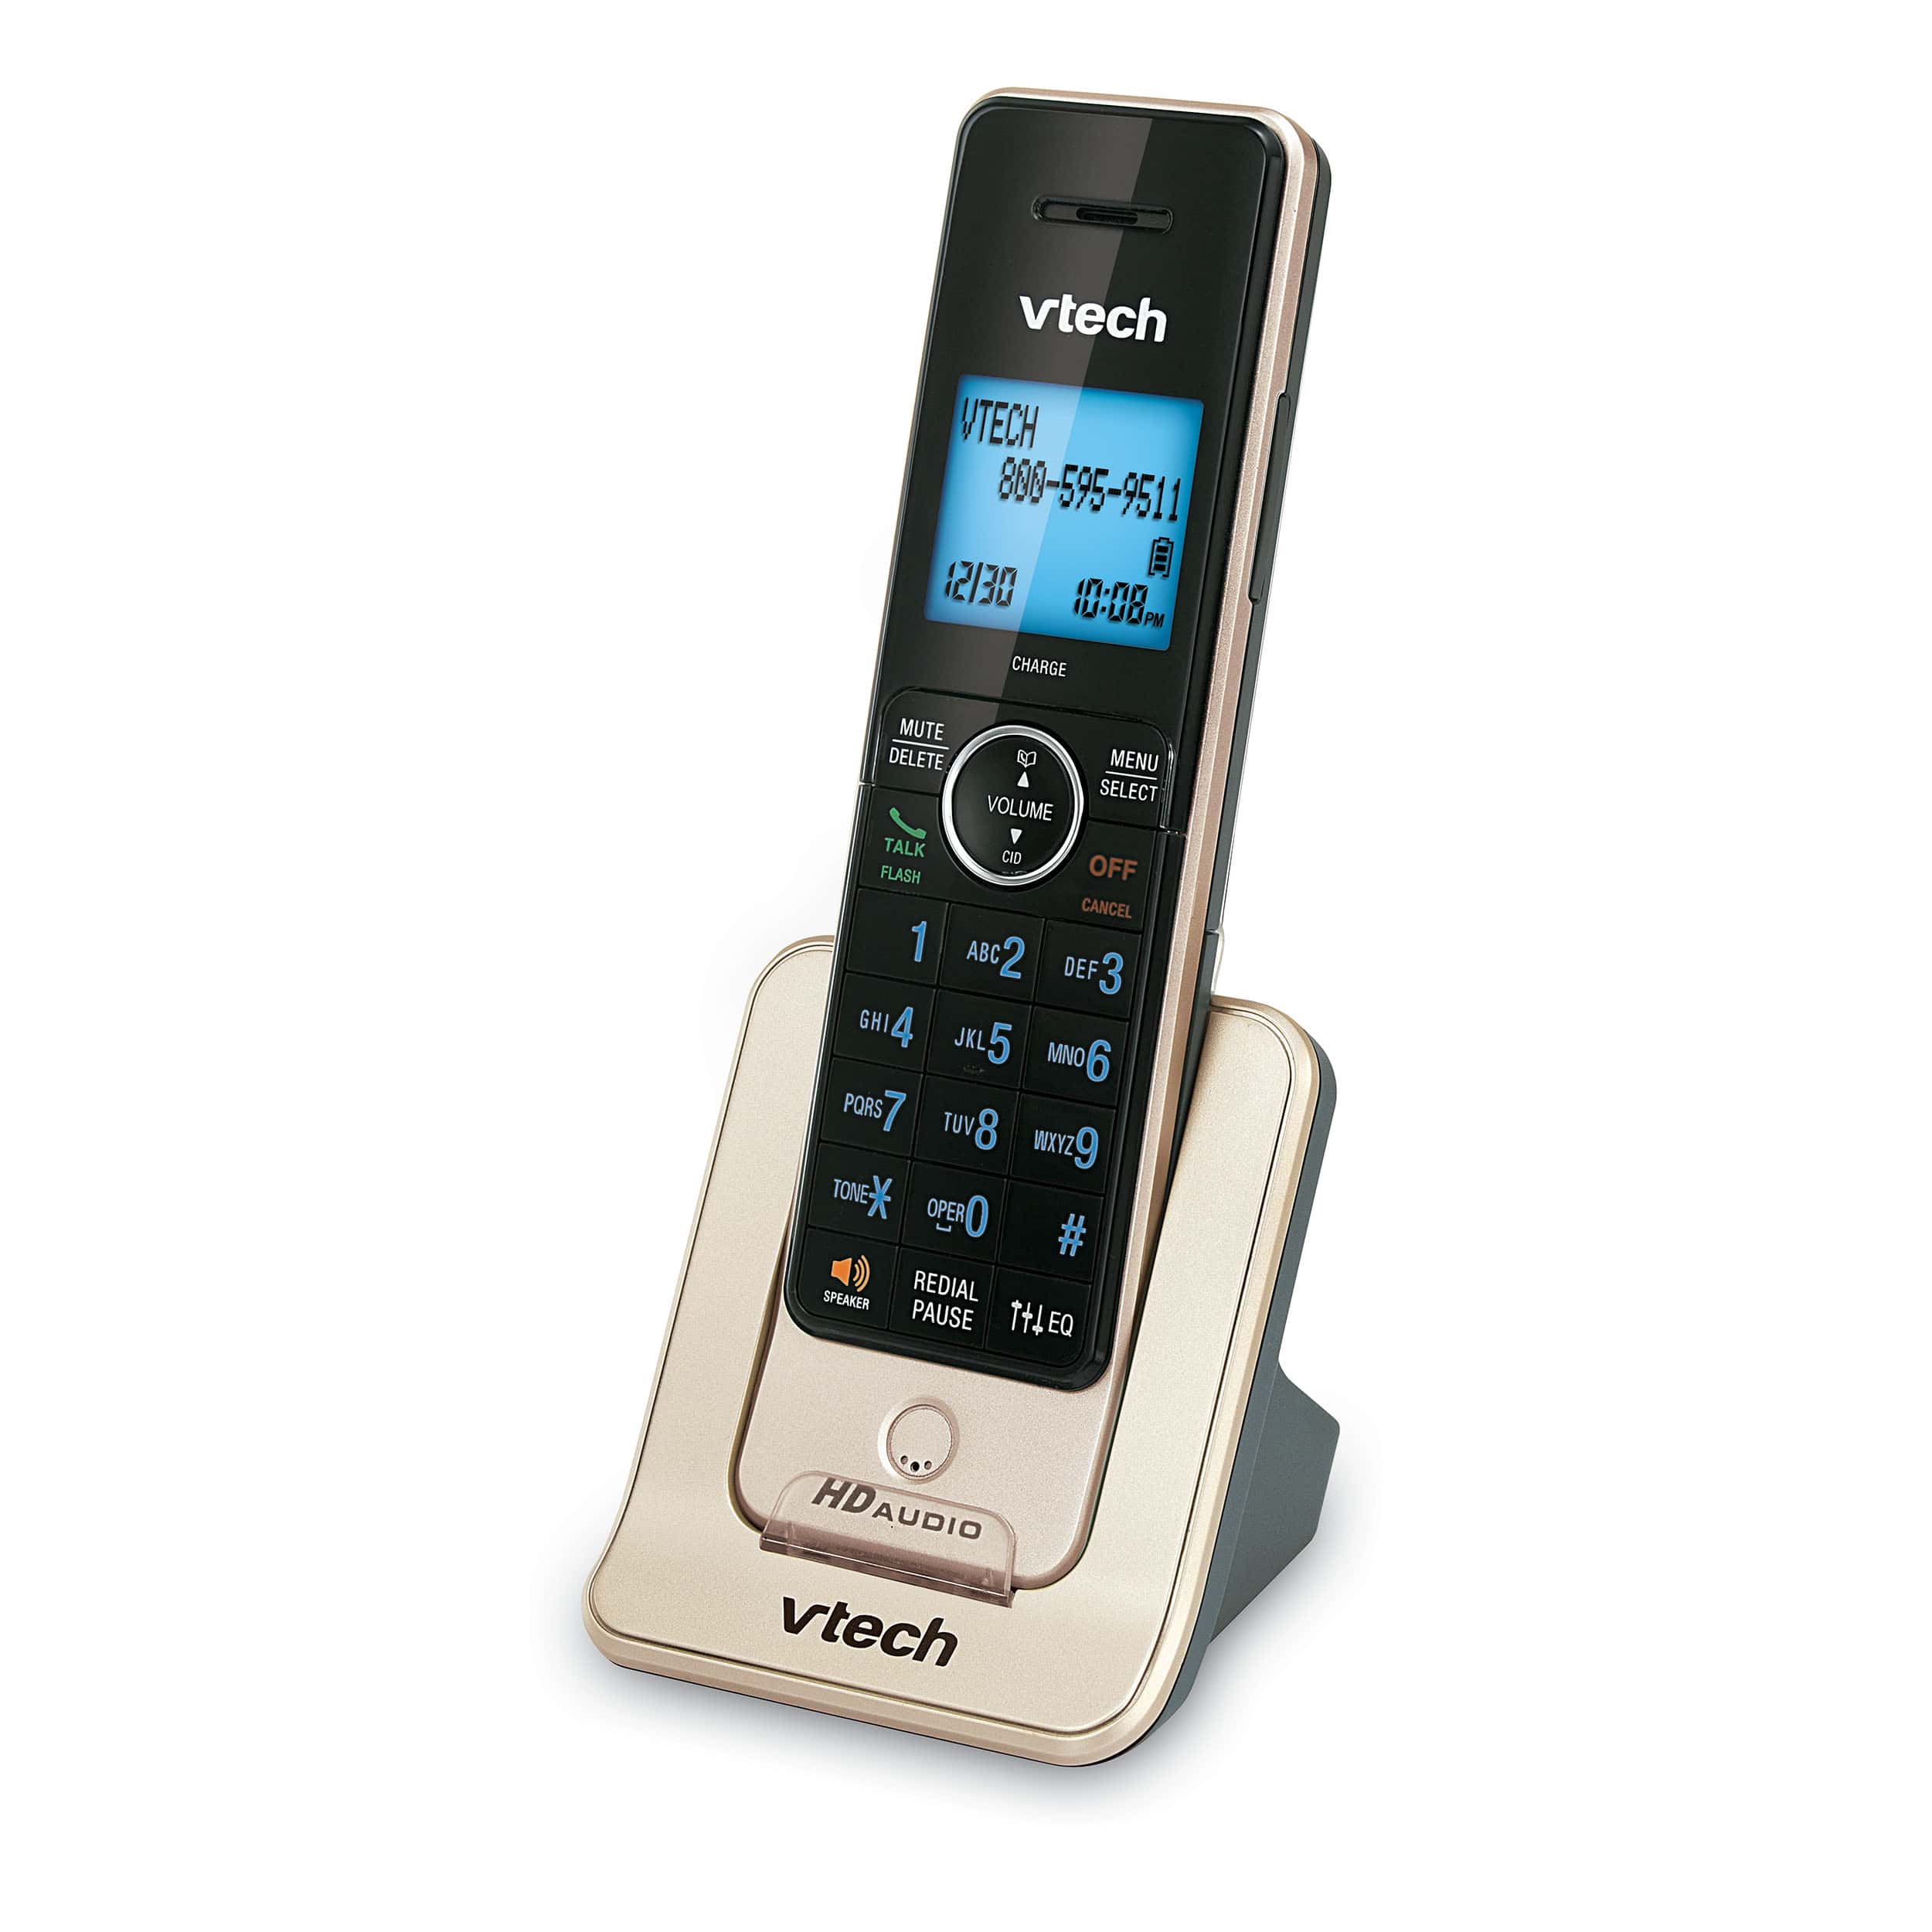 6 Handset Phone System with Caller ID/Call Waiting - view 5